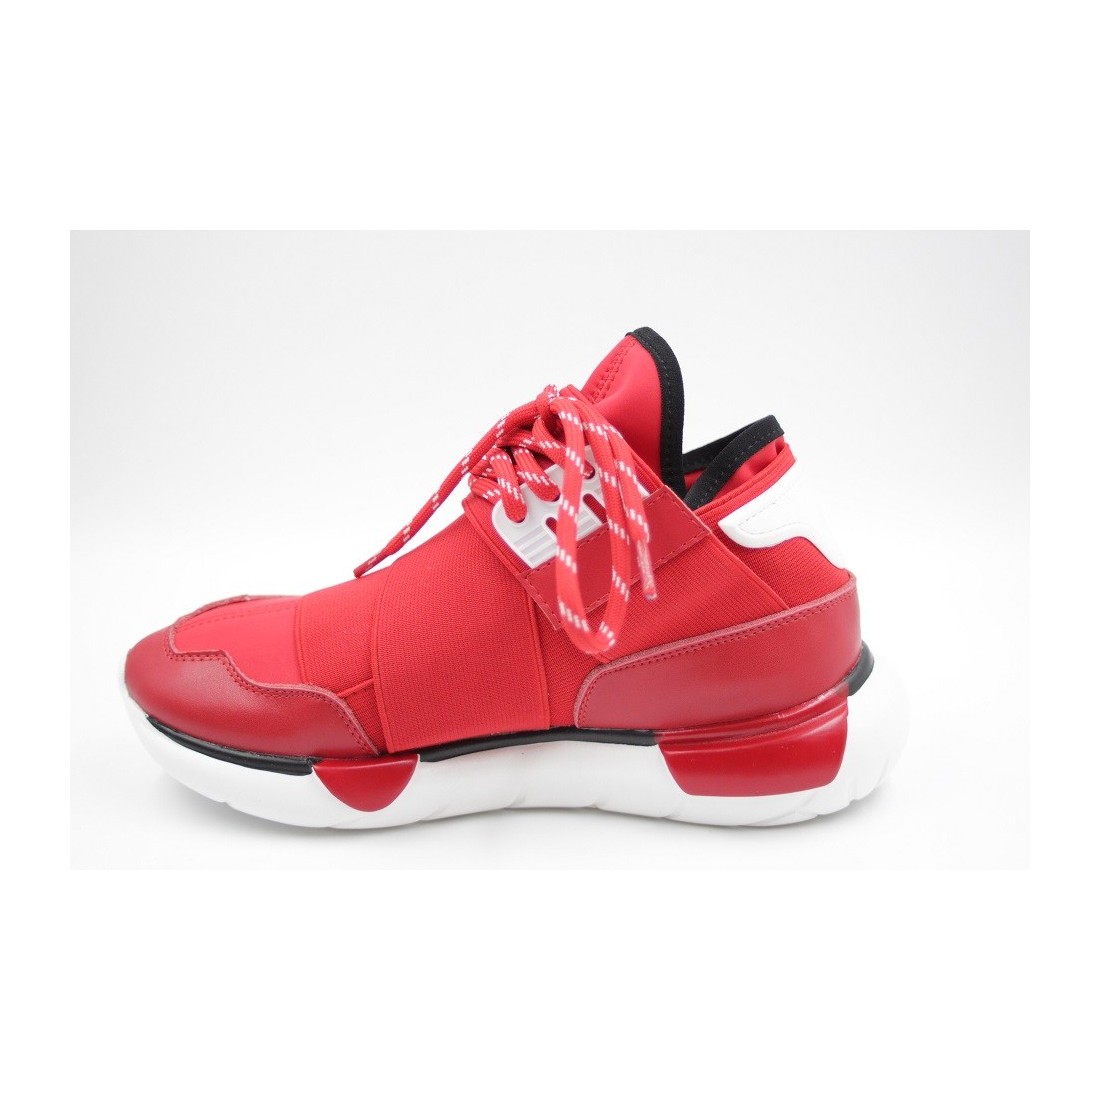 Sneakers fashion red mania